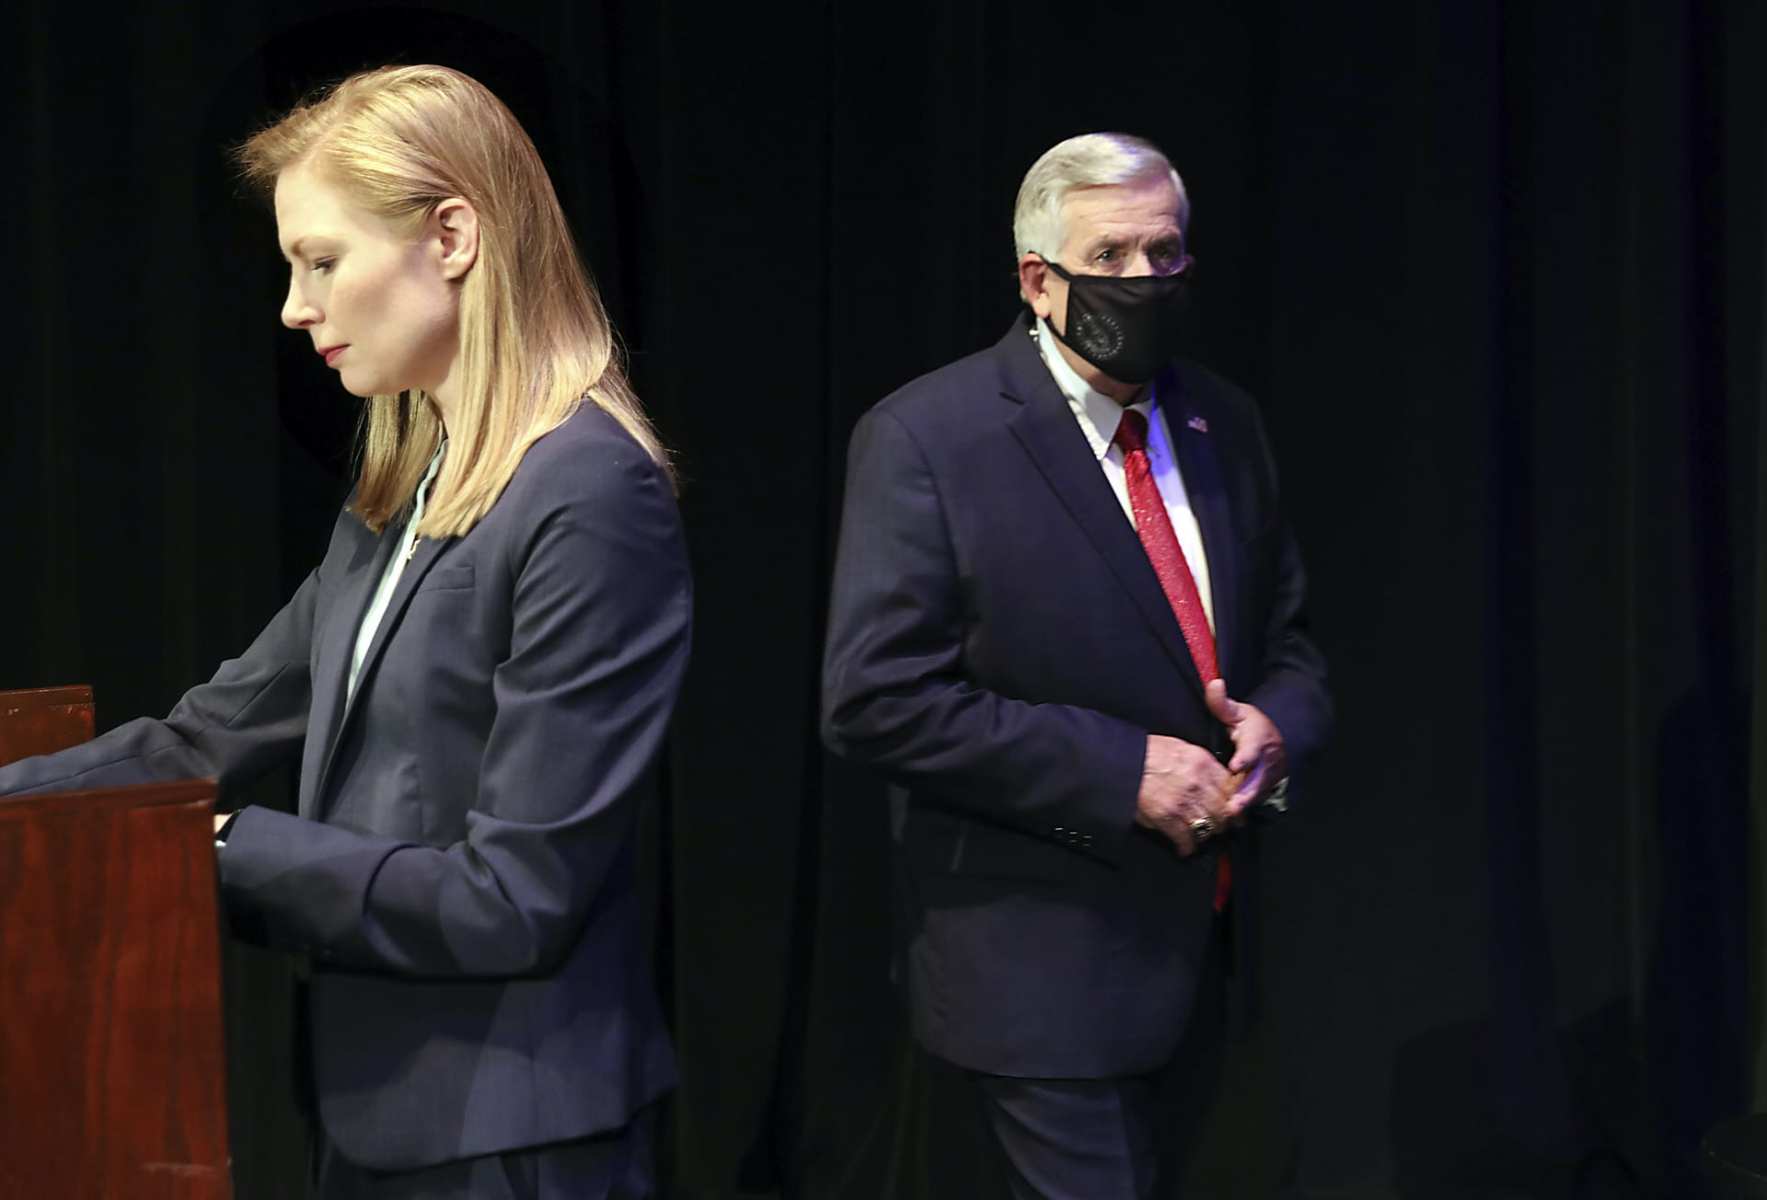 Missouri gubernatorial candidates, Gov. Mike Parson, and State Auditor Nicole Galloway are seen onstage before the Missouri gubernatorial debate at the Missouri Theatre on Friday, Oct. 9, 2020 in Columbia, Missouri. (Robert Cohen/St. Louis Post-Dispatch via AP, Pool)